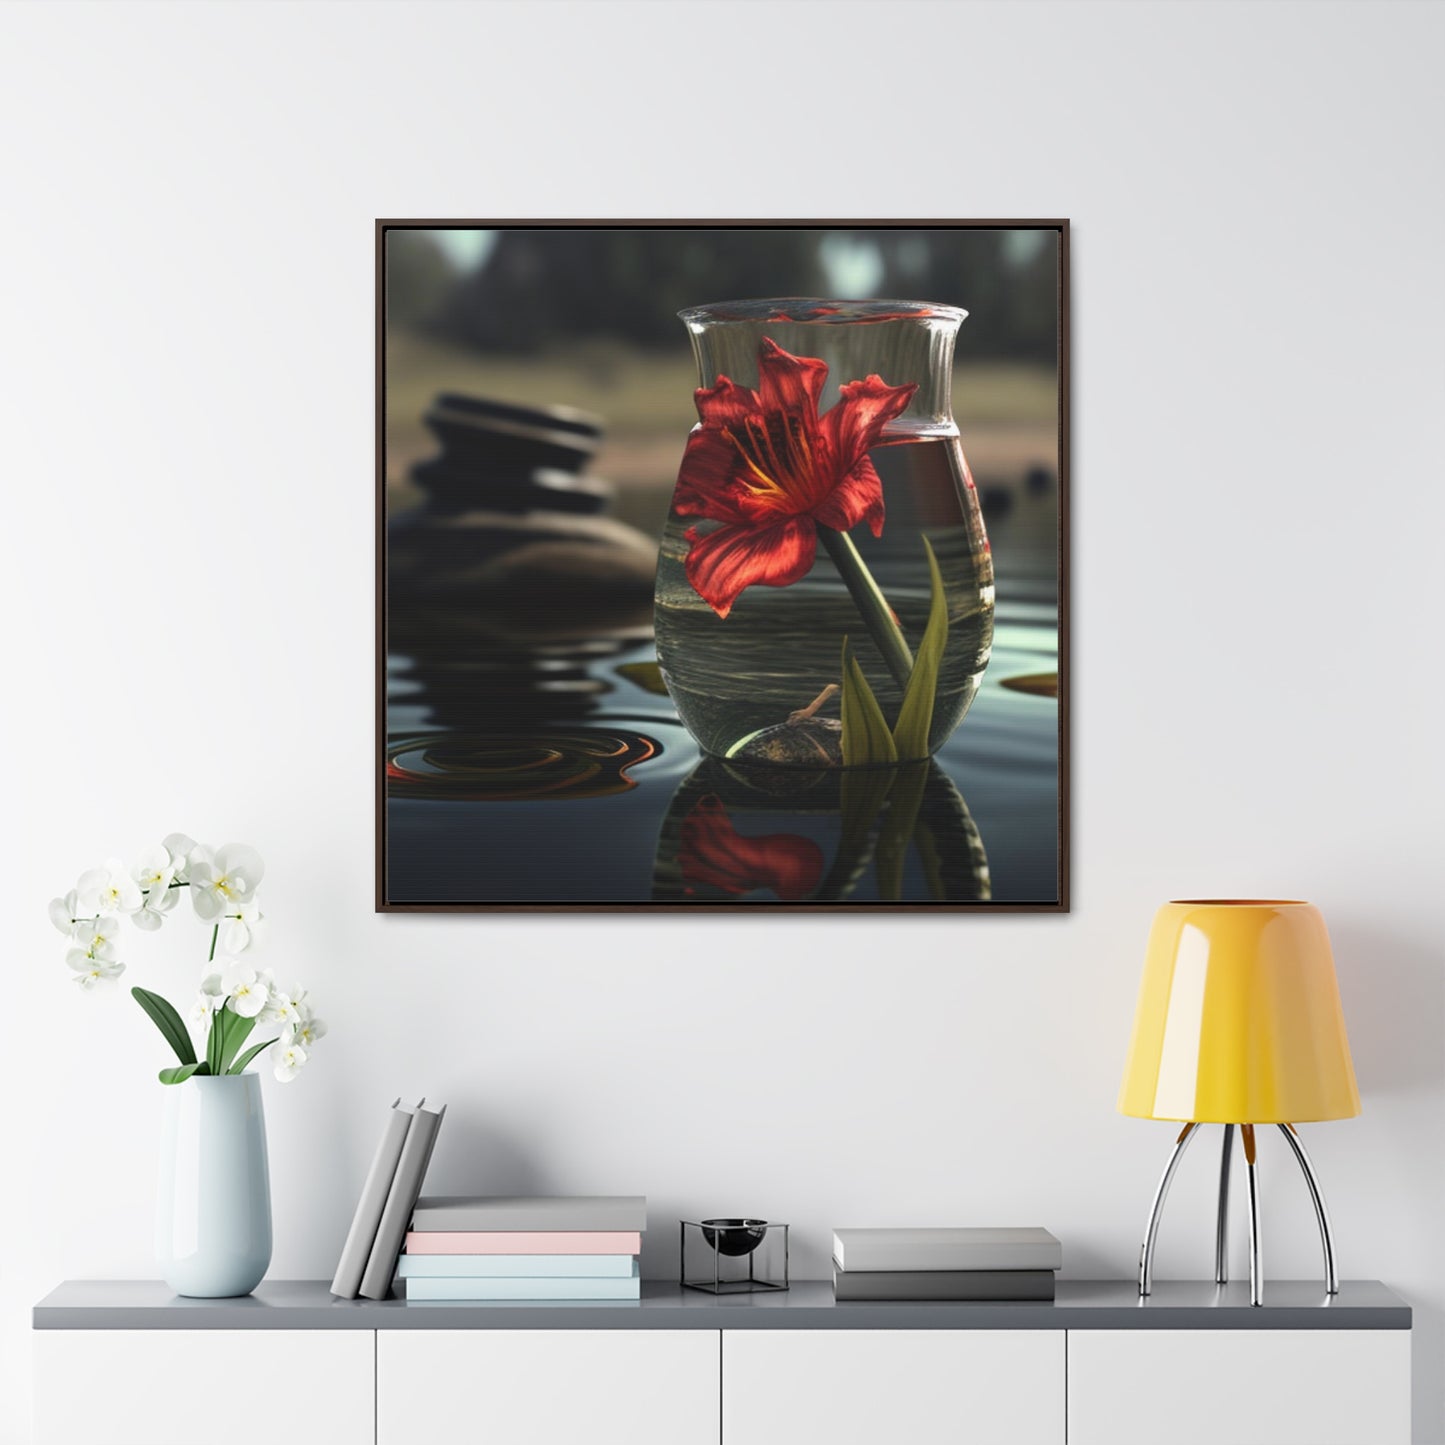 Gallery Canvas Wraps, Square Frame Red Lily in a Glass vase 4